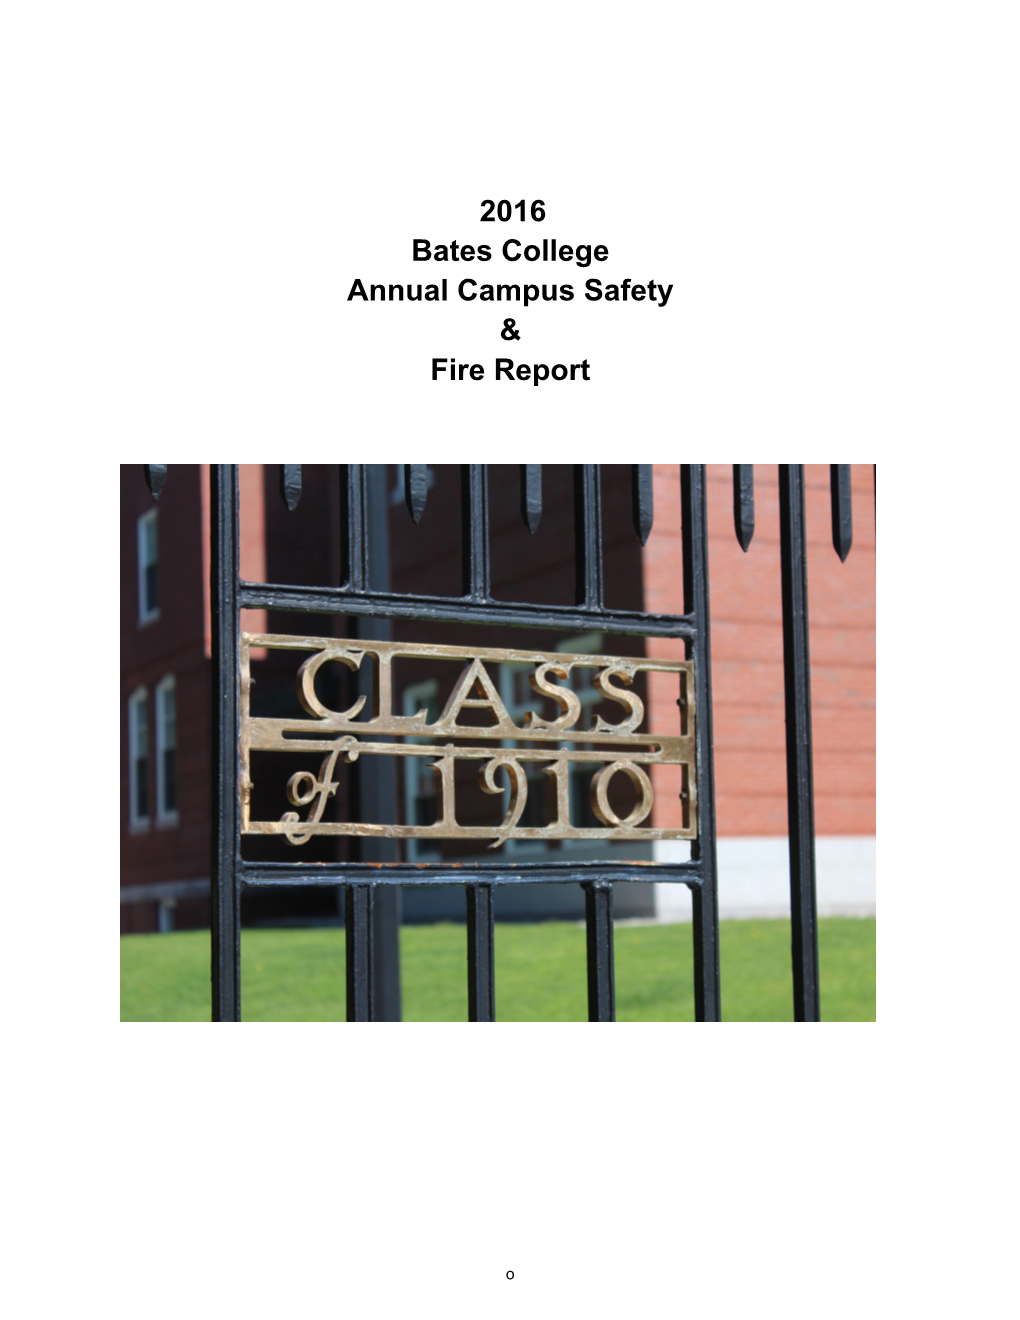 2016 Bates College Annual Campus Safety & Fire Report